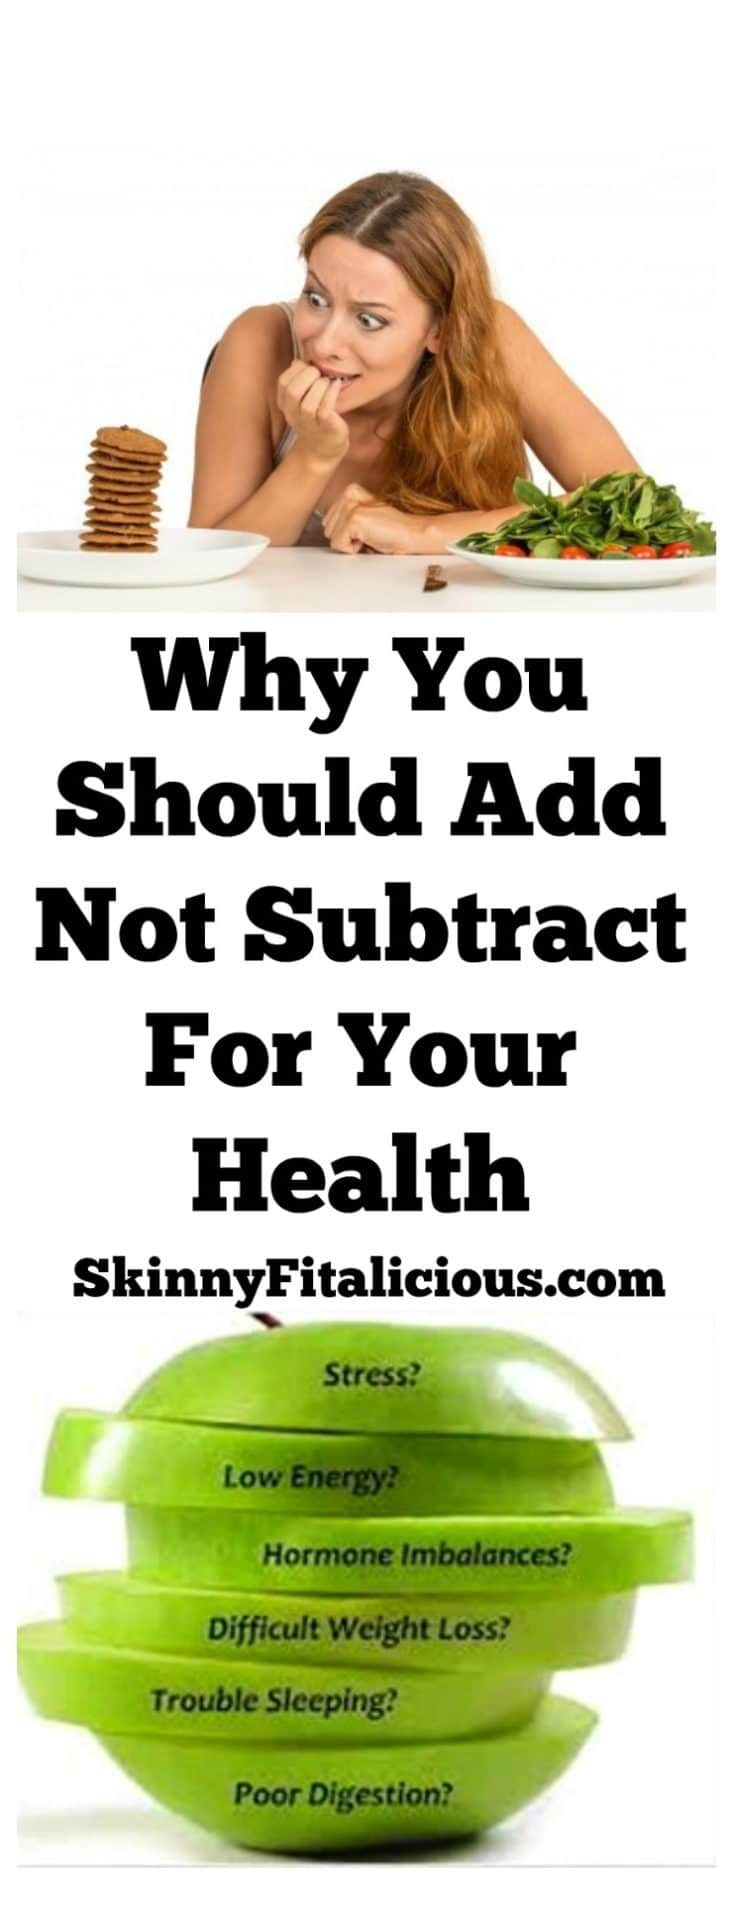 It's not realistic for the average person to implement healthy habits all at once & maintain them which is why you should add not subtract for your health.